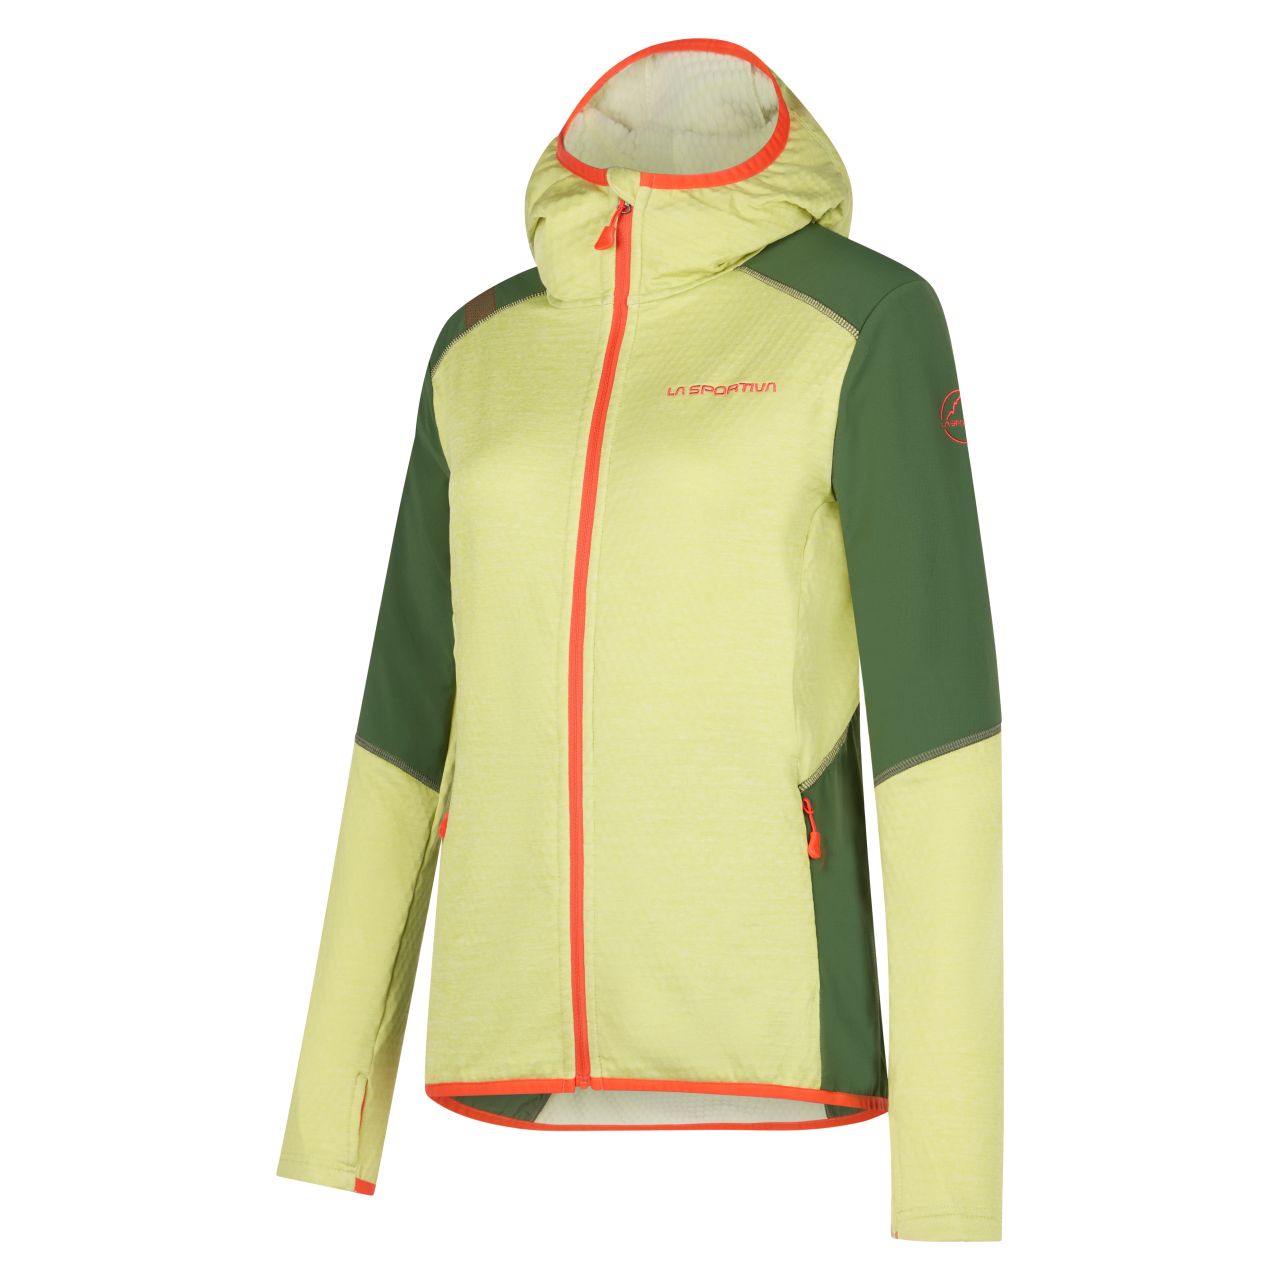 Existence Hoody Woman Green Banana/Forest